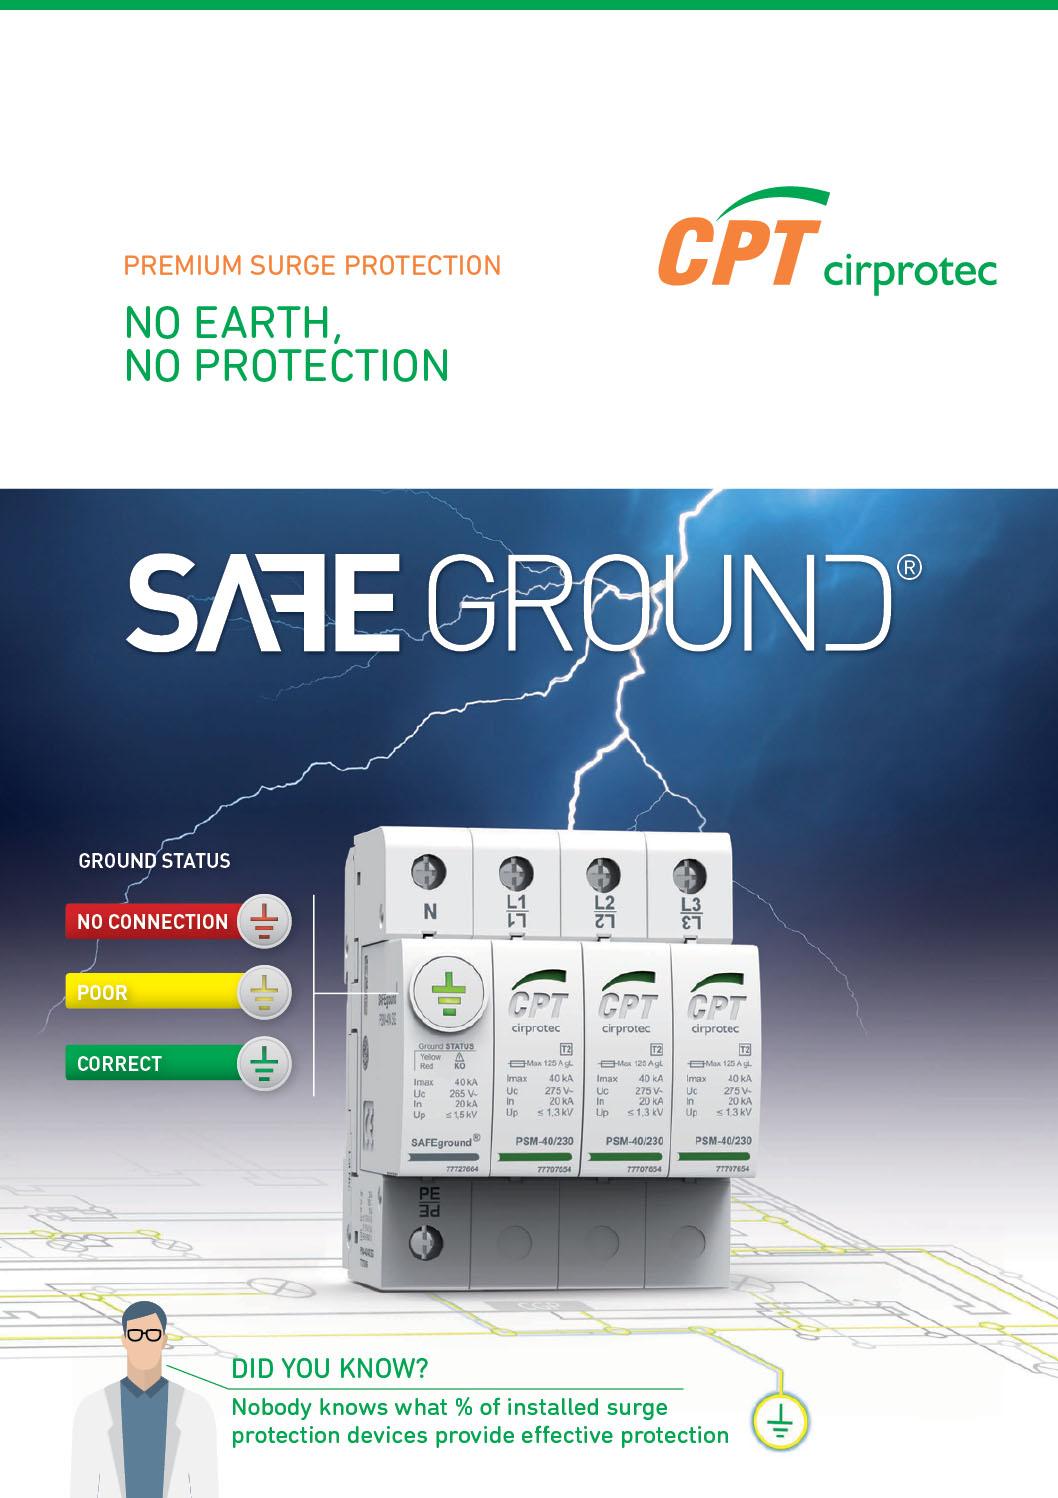 CPT-Cirprotec-V-SAFEGROUND-MONITORING-GROUNDING-SPD supplied by ElectroMechanica